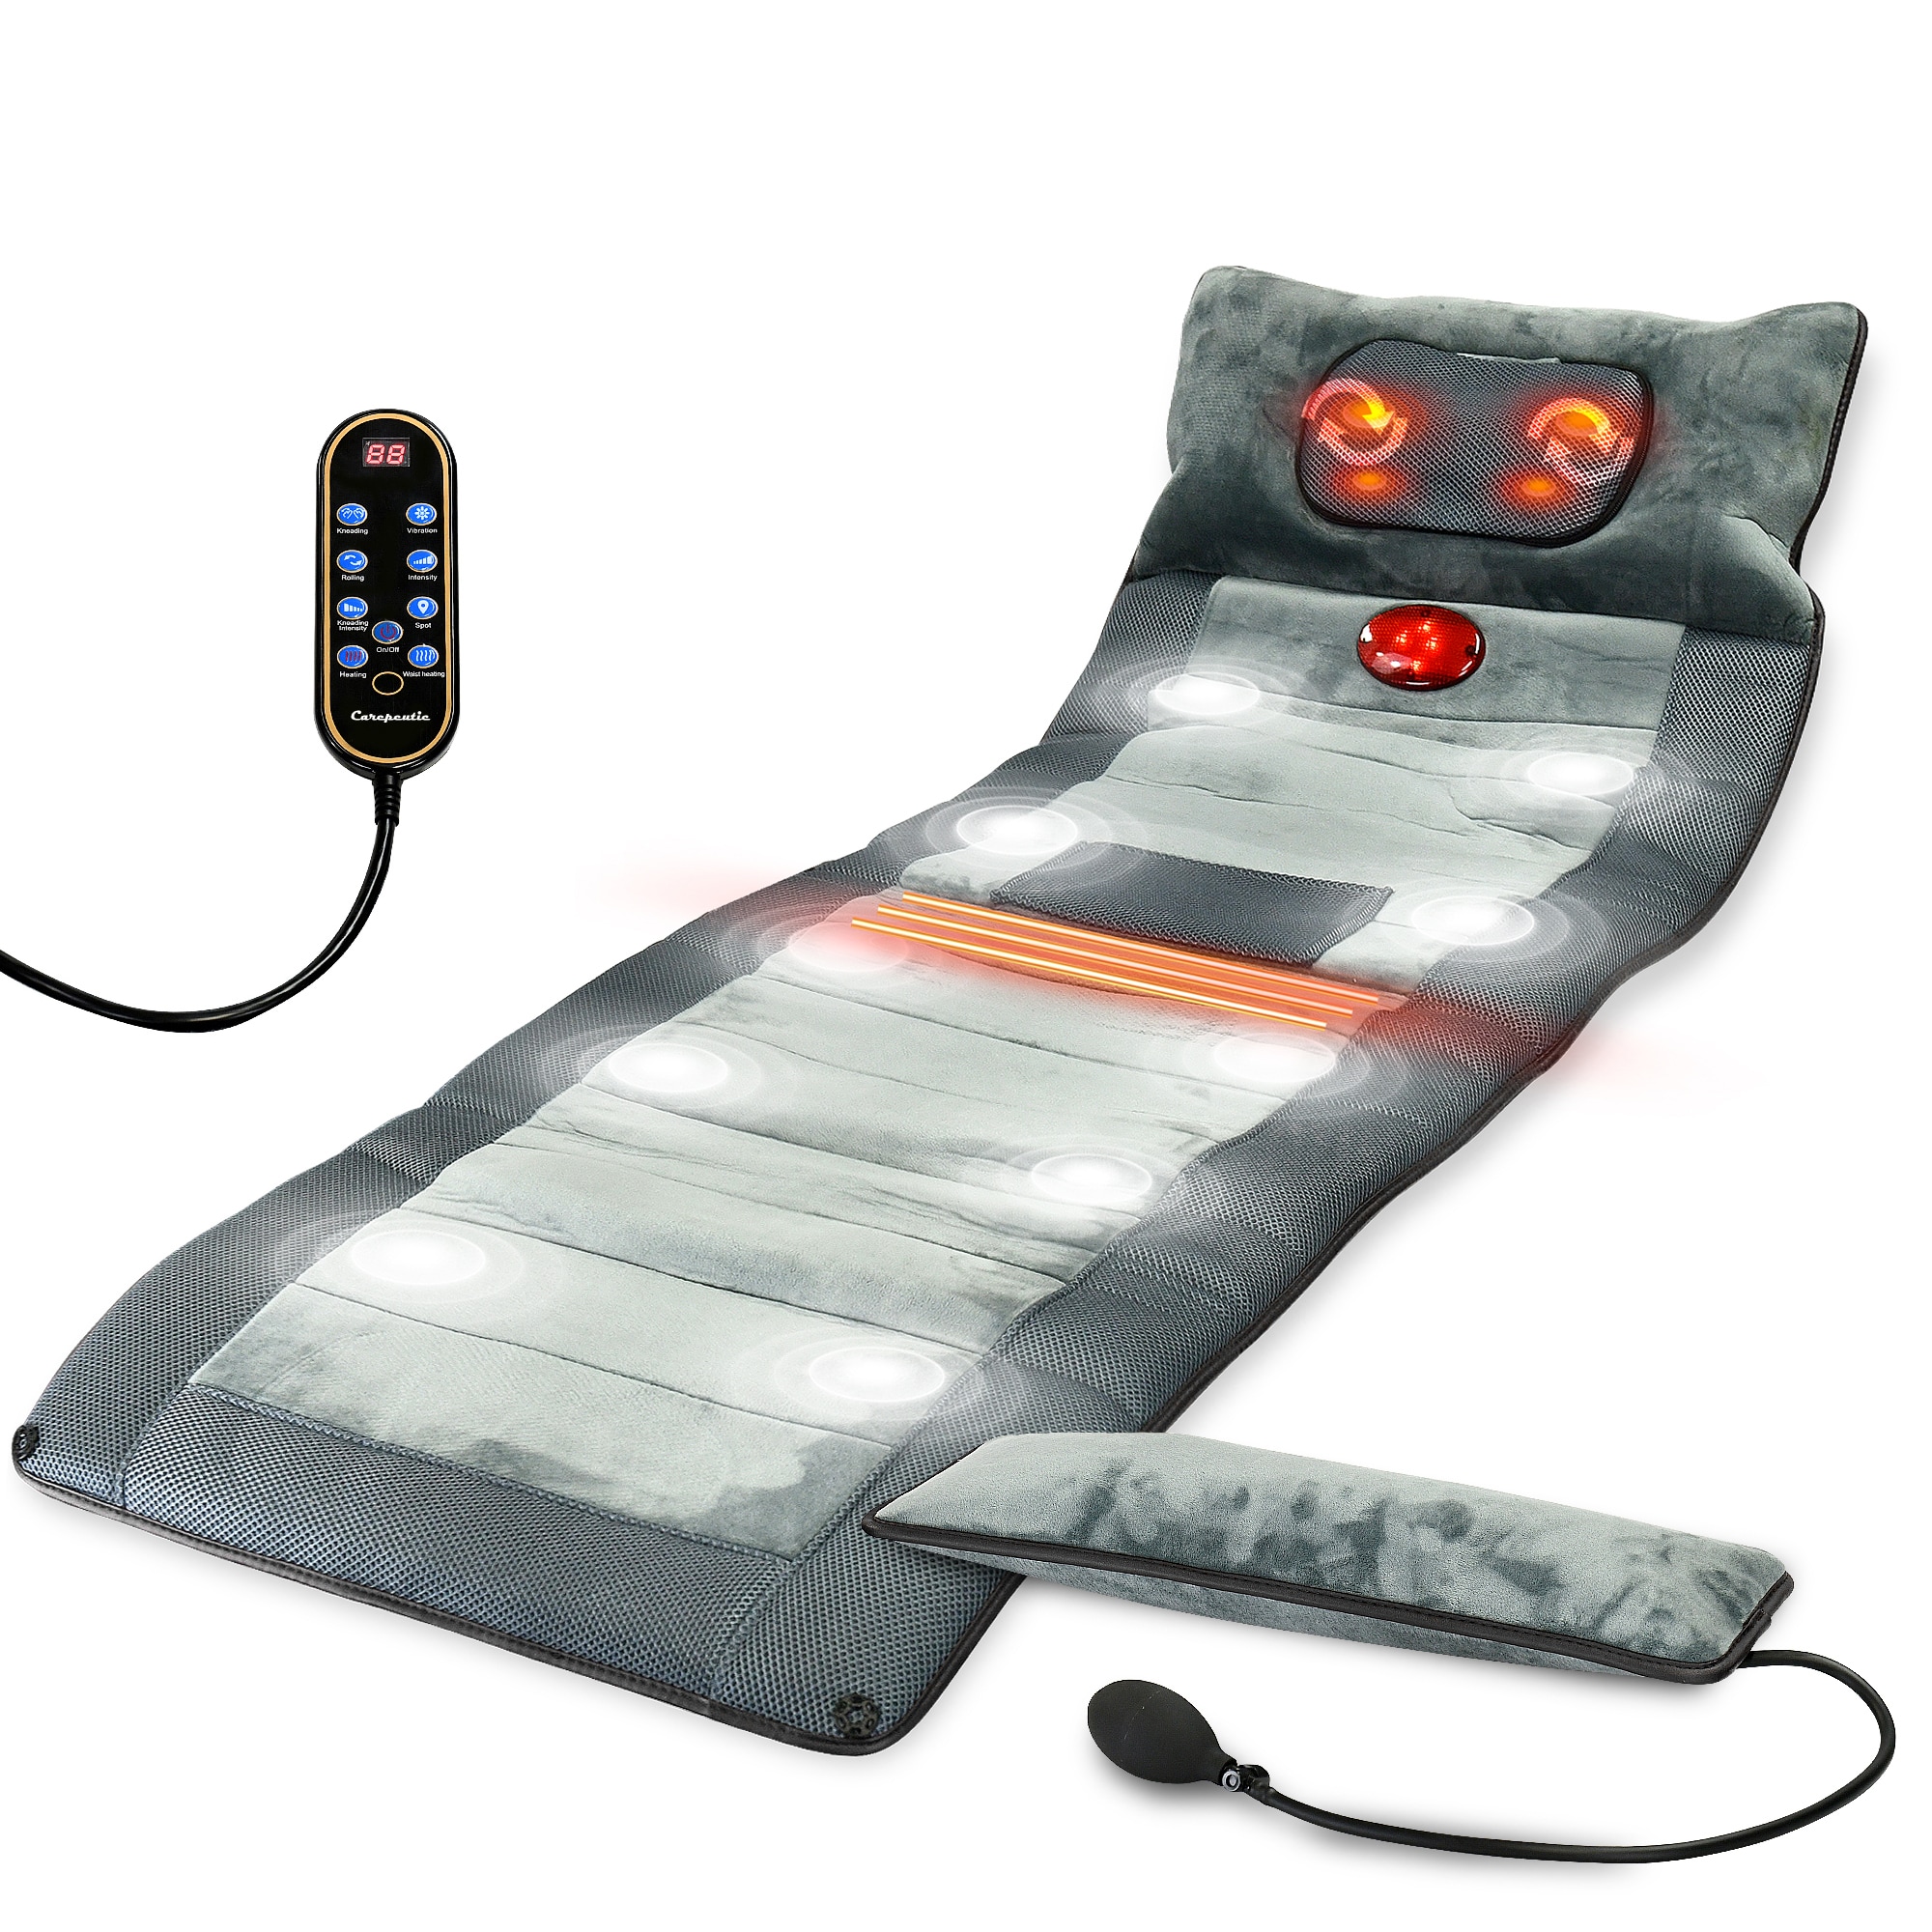  Massage Mat, Full Body Heating Pad Vibration Gray Heated Electric  Mat Salon Home with Heat Pads for Back Massager Neck and Shoulder Electric  Massage Chair Pad Gifts Men Dad : Health